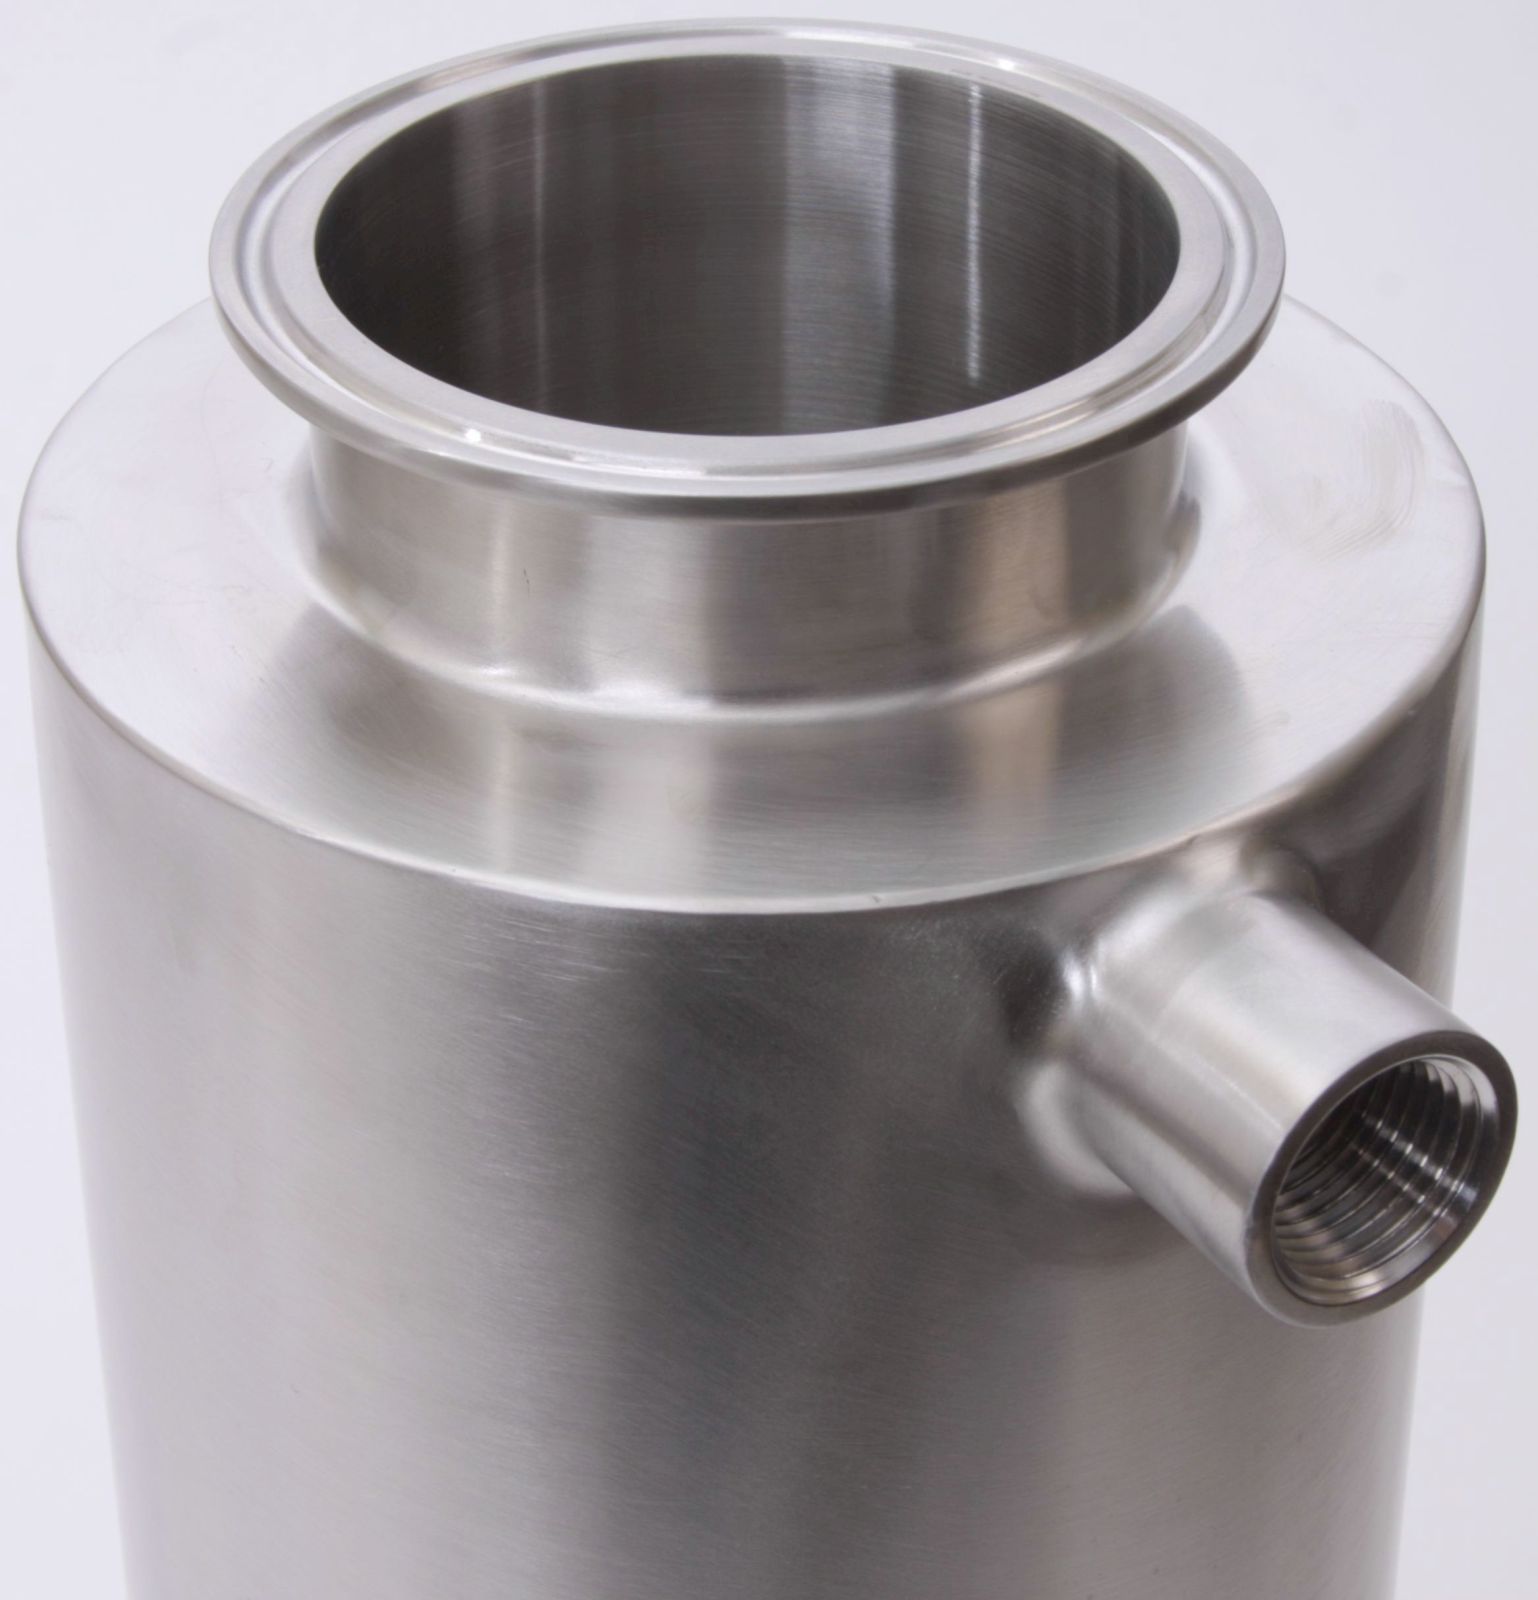 w/ Glacier Tanks - 3 Pack - Stainless Steel SS304 / 3A 2 FNPT 1/2 in Jacketed Material Column Tri Clamp 3 inch x 48 in